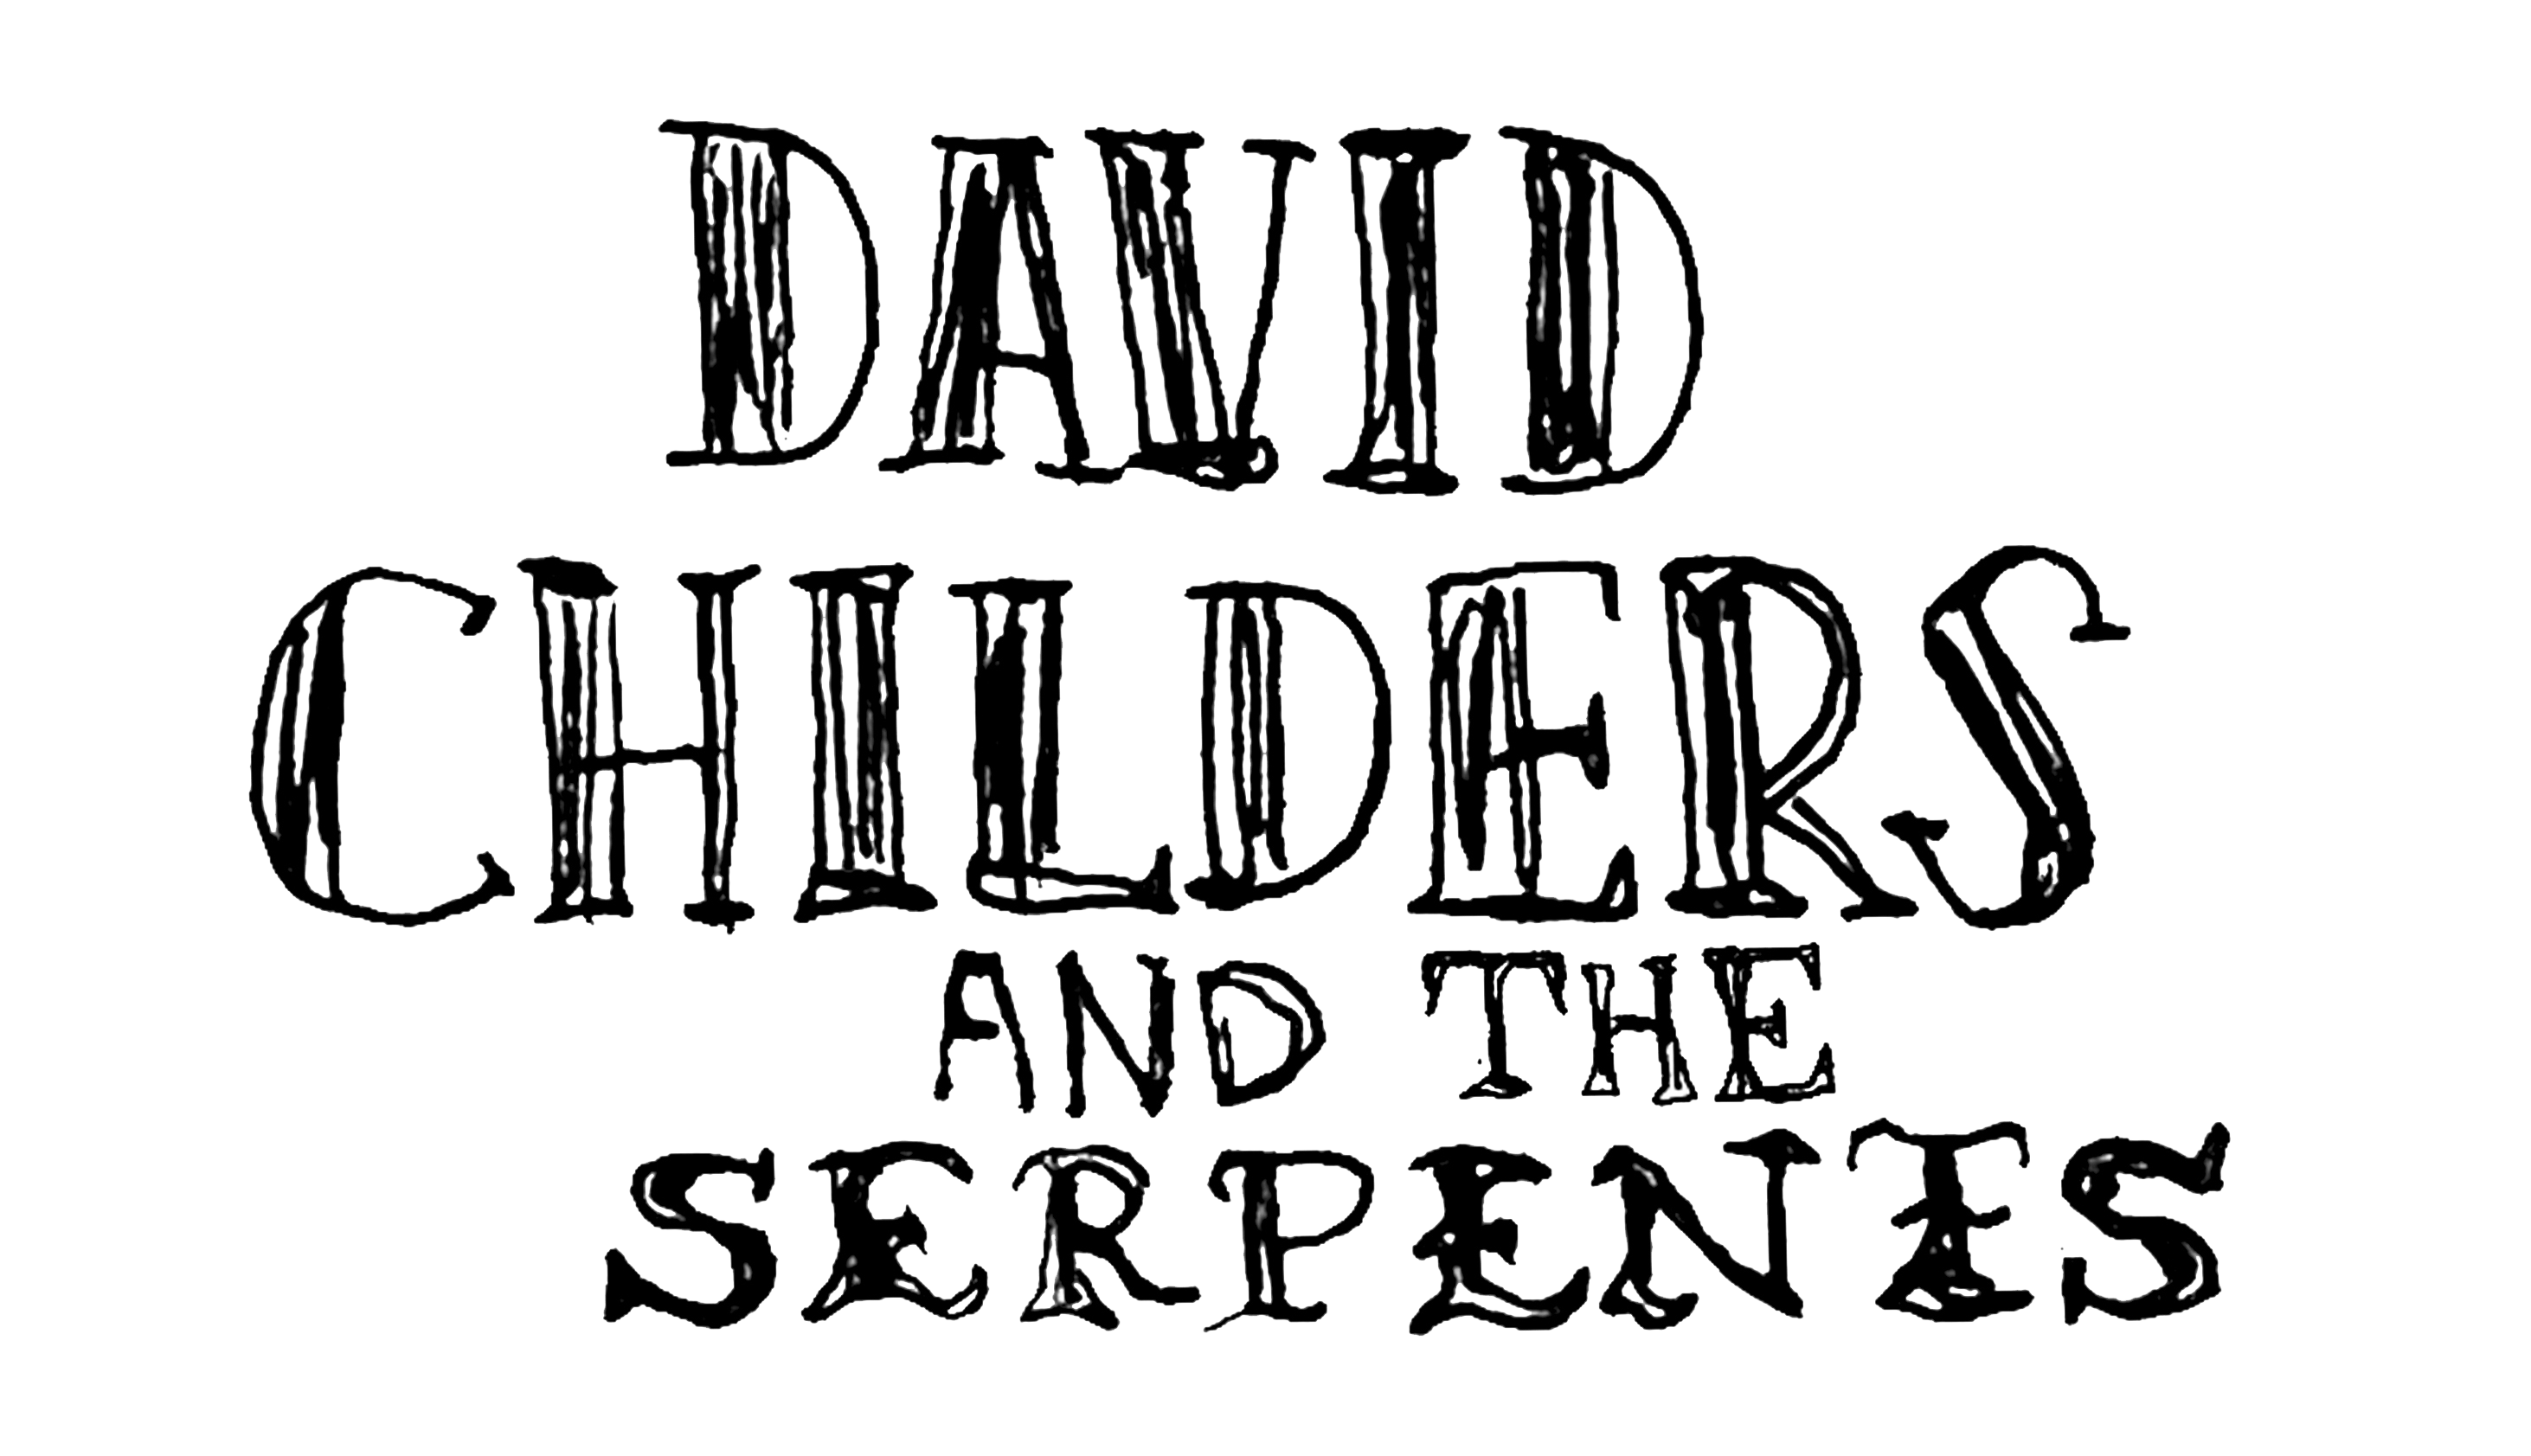 David Childers and the Serpents